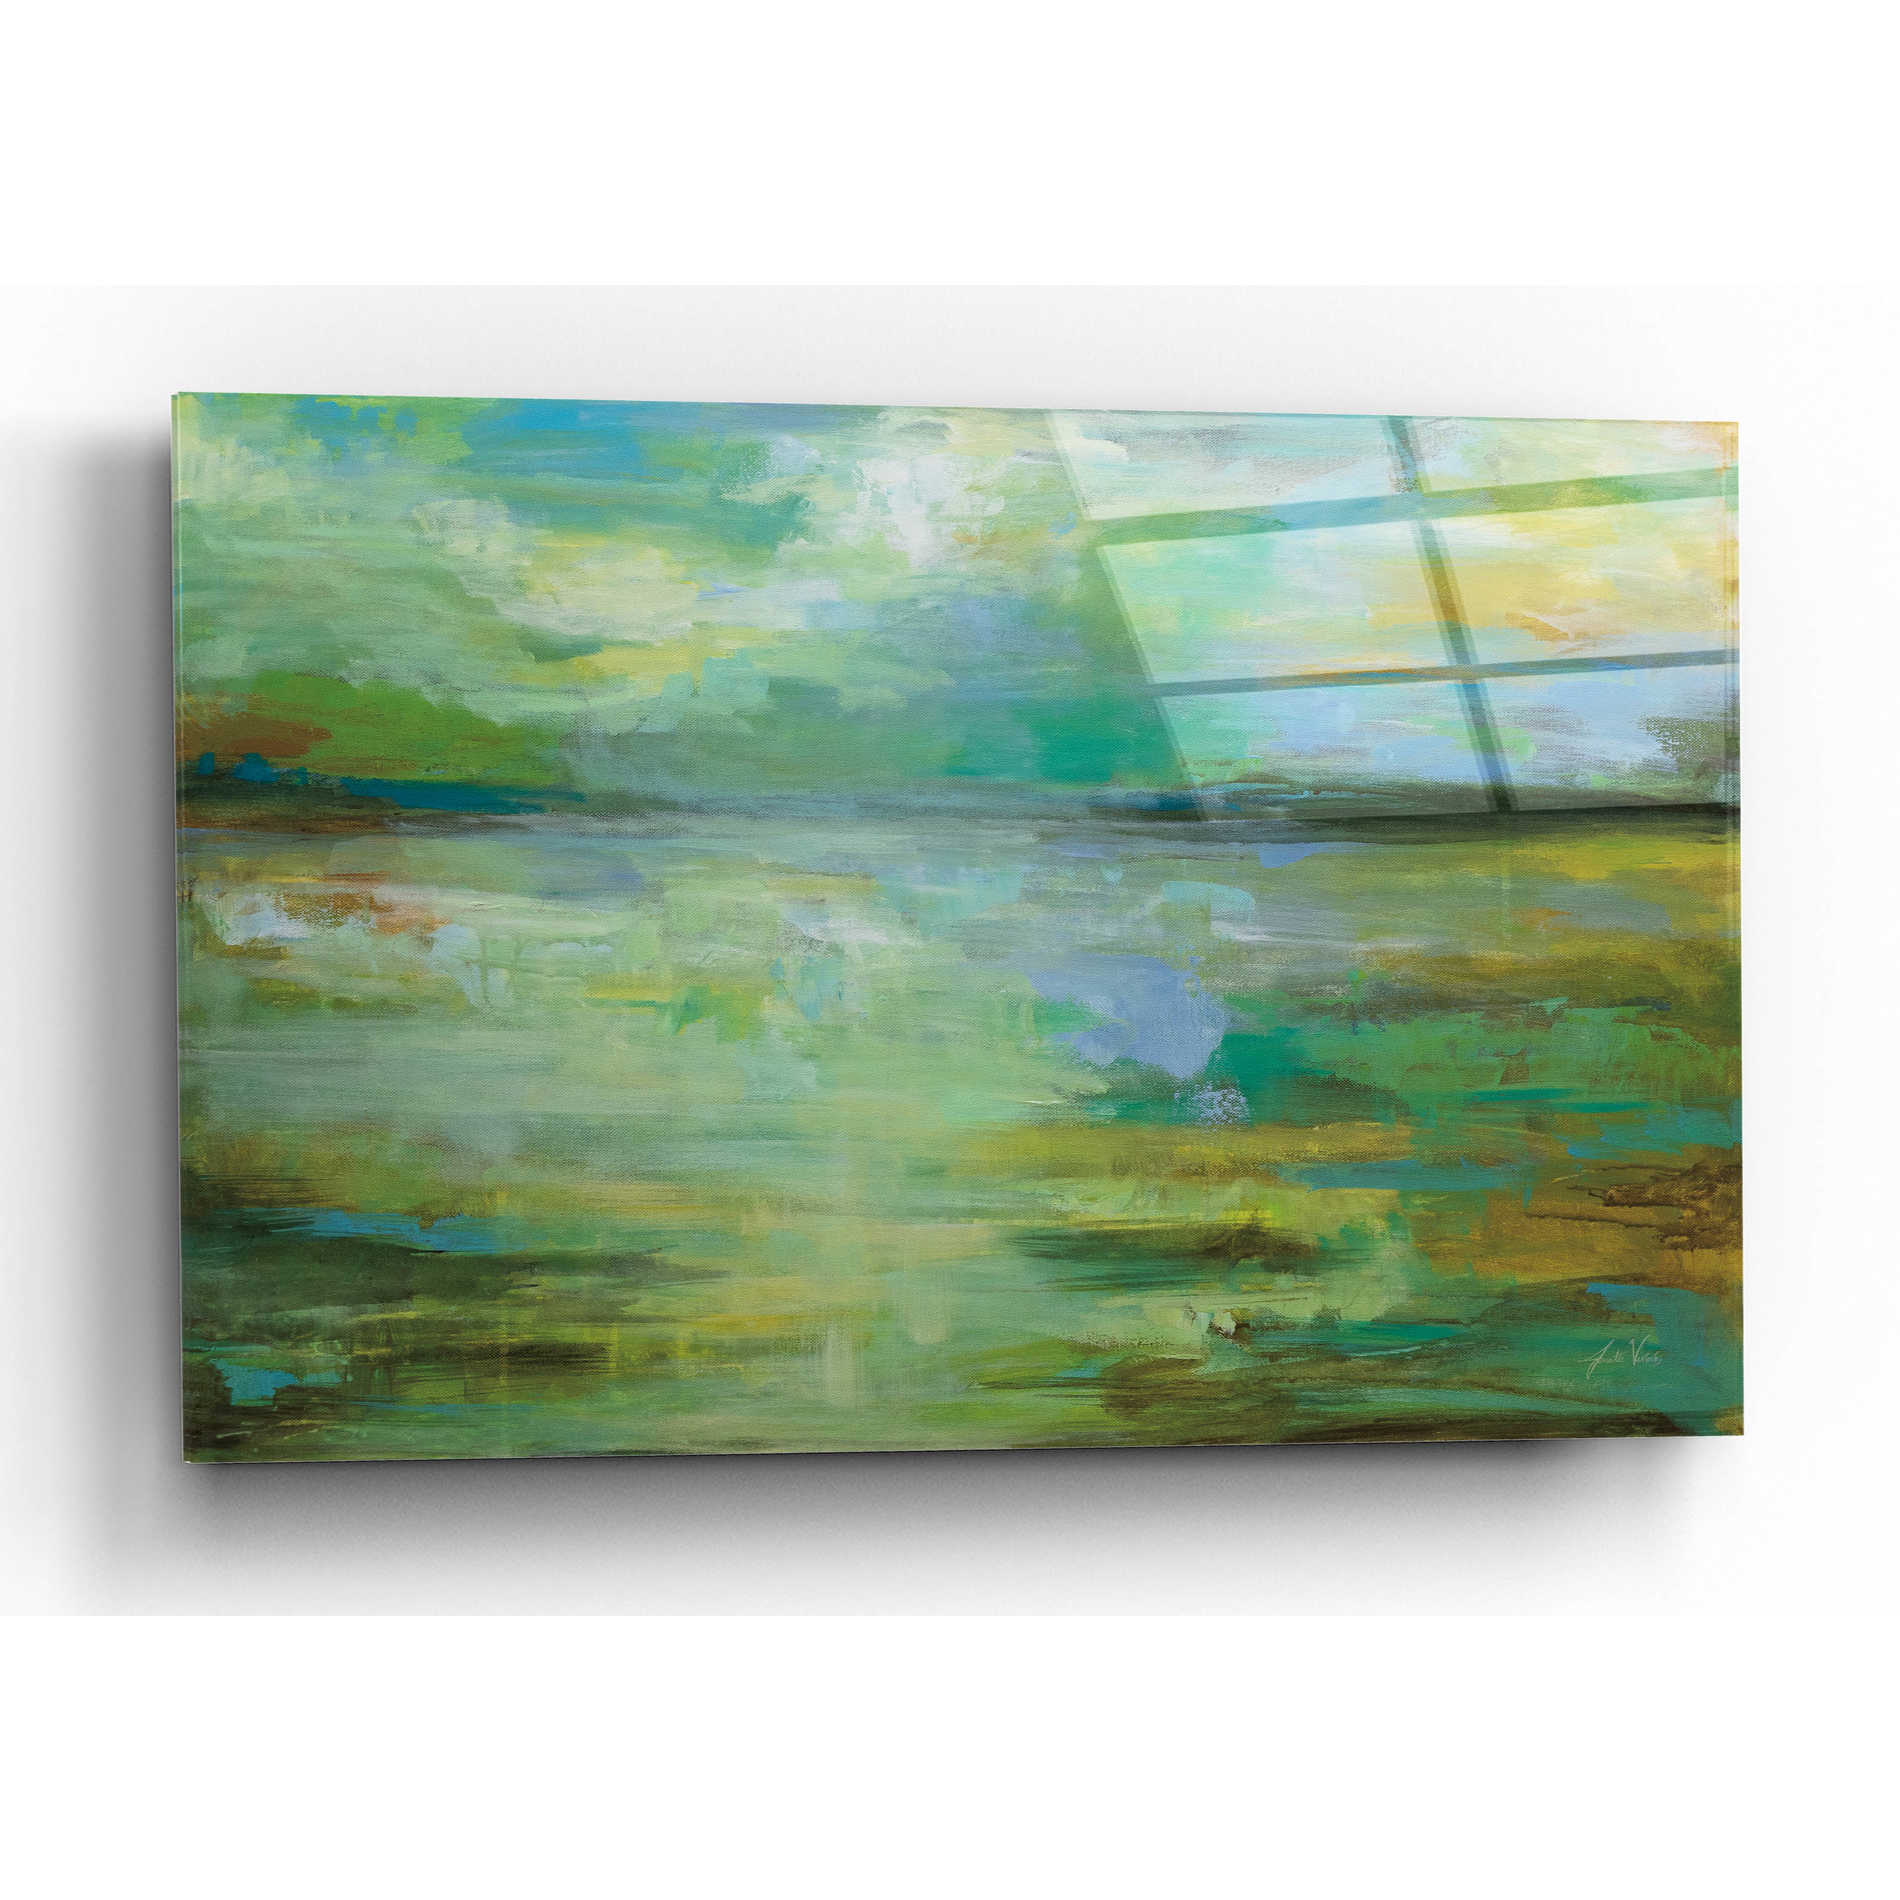 Epic Art 'Calm' by Jeanette Vertentes, Acrylic Glass Wall Art,16x12